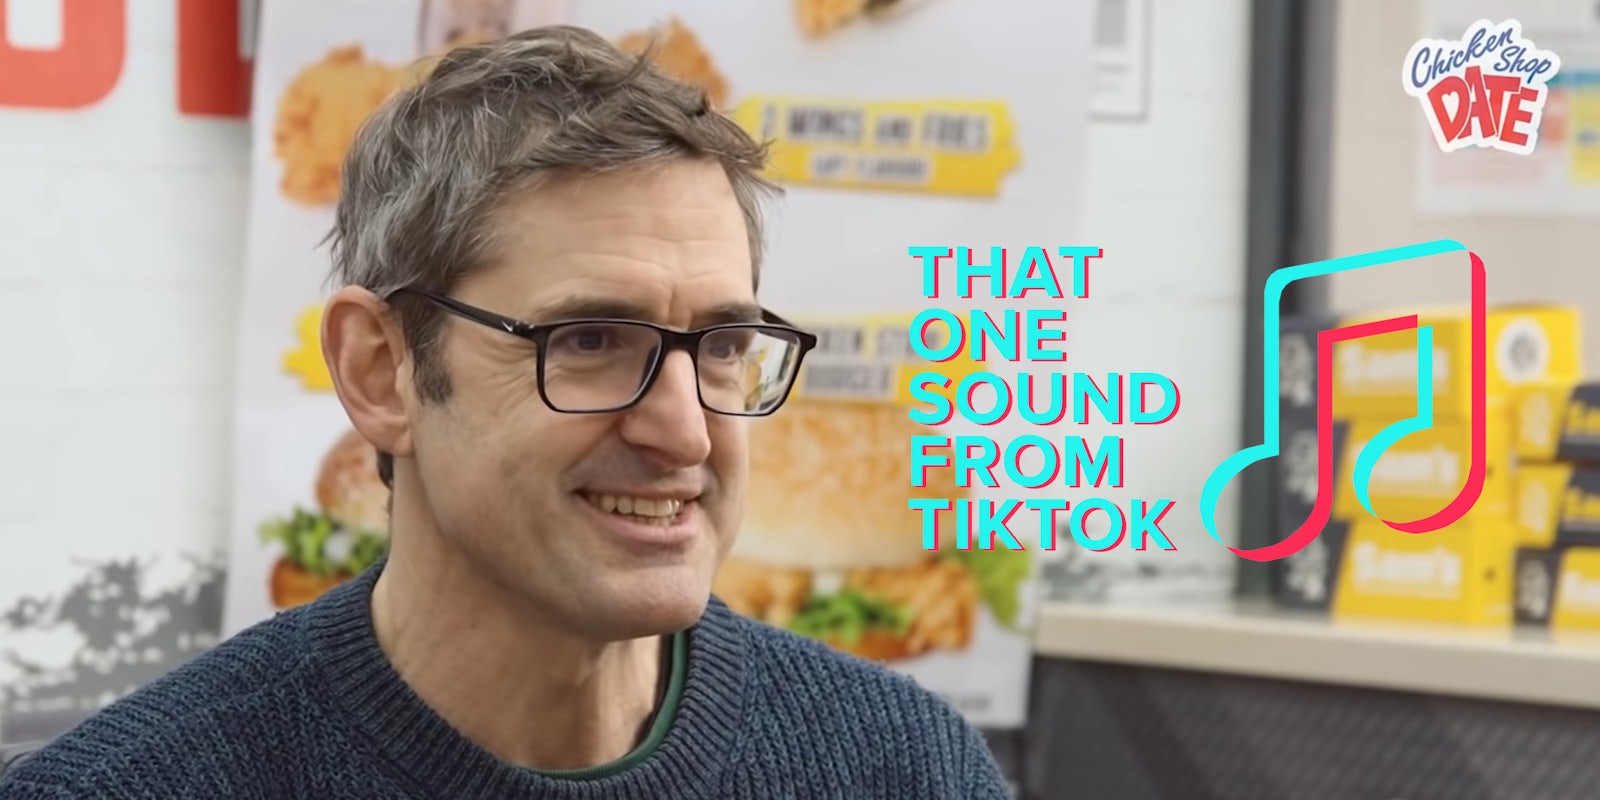 Louis Theroux in Chicken Shop Date with 'That One Sound From TikTok' logo